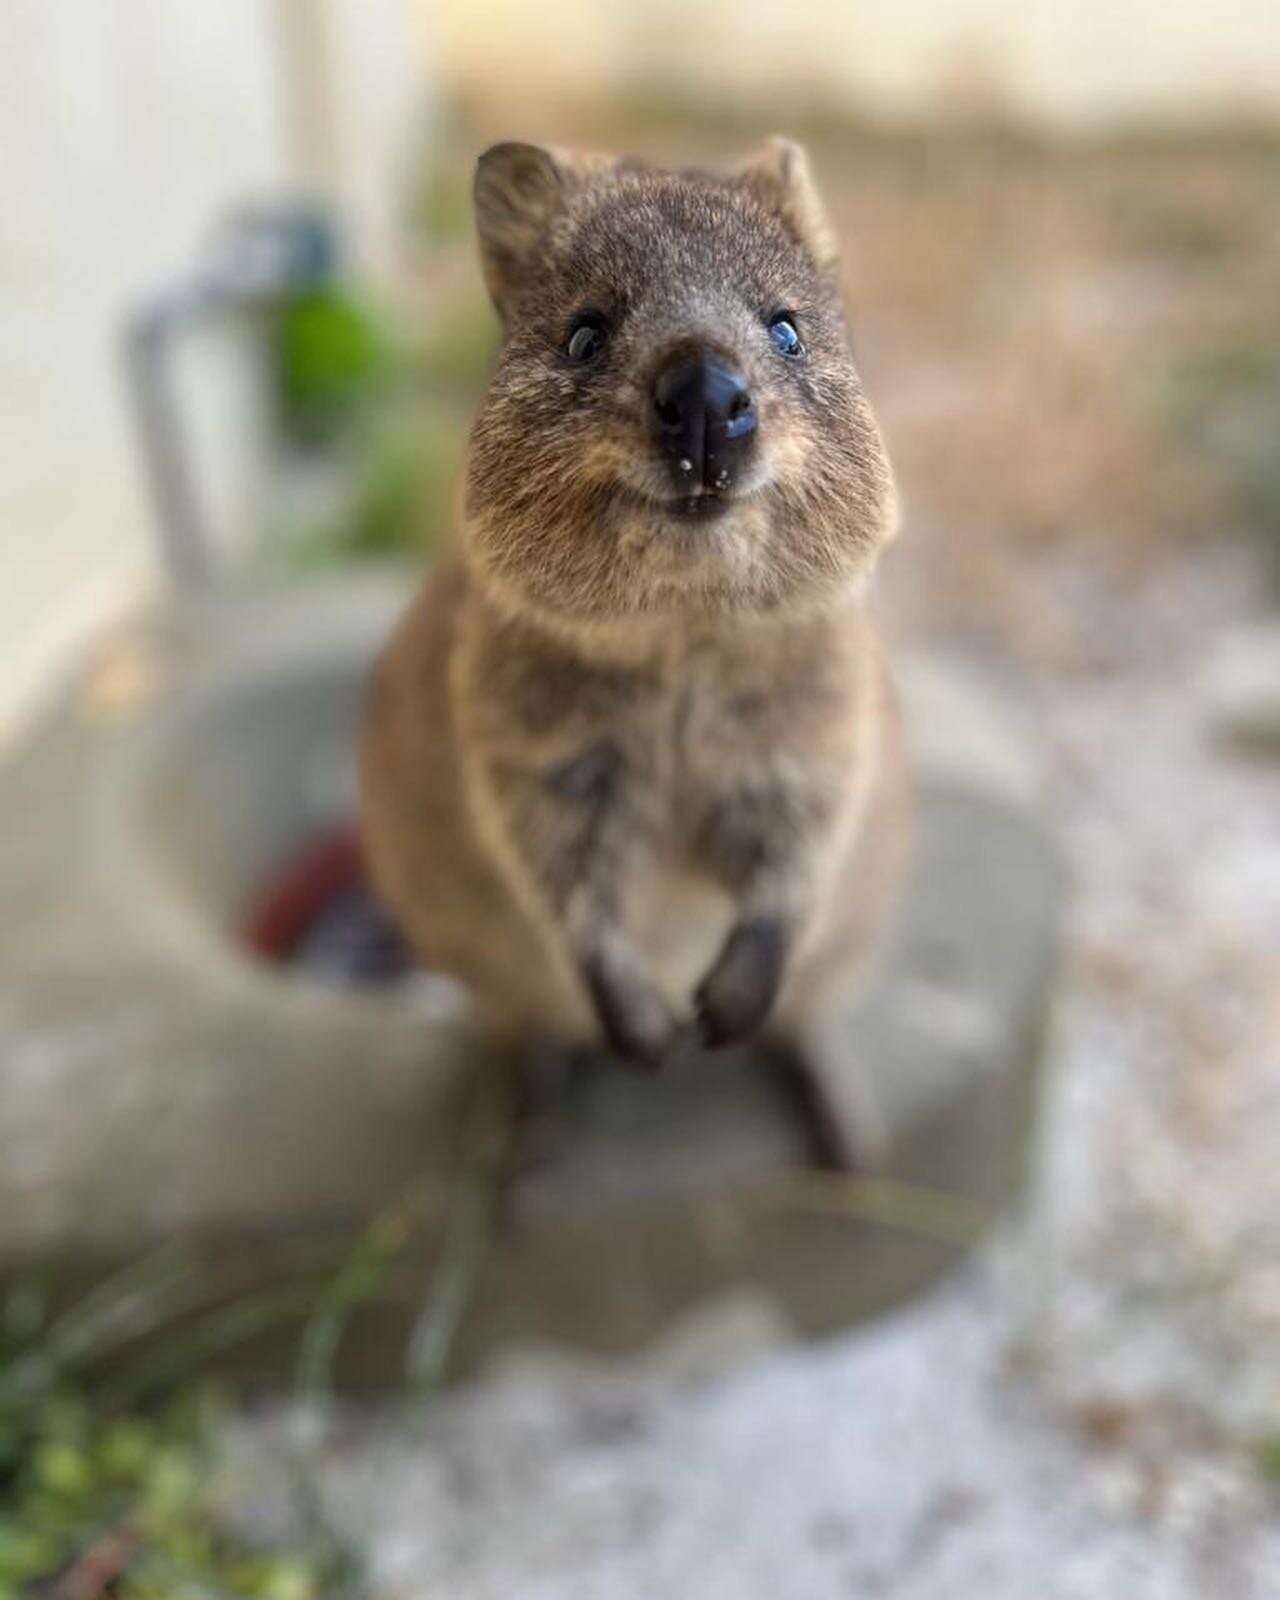 Rottnest Island is just 20 kms across the Indian Ocean from Perth.  It&rsquo;s about beaching, biking and quokkas &hellip; Great spot for a very low-key family holiday!! 

#rottnestisland #quokkas #summer #tourismwa